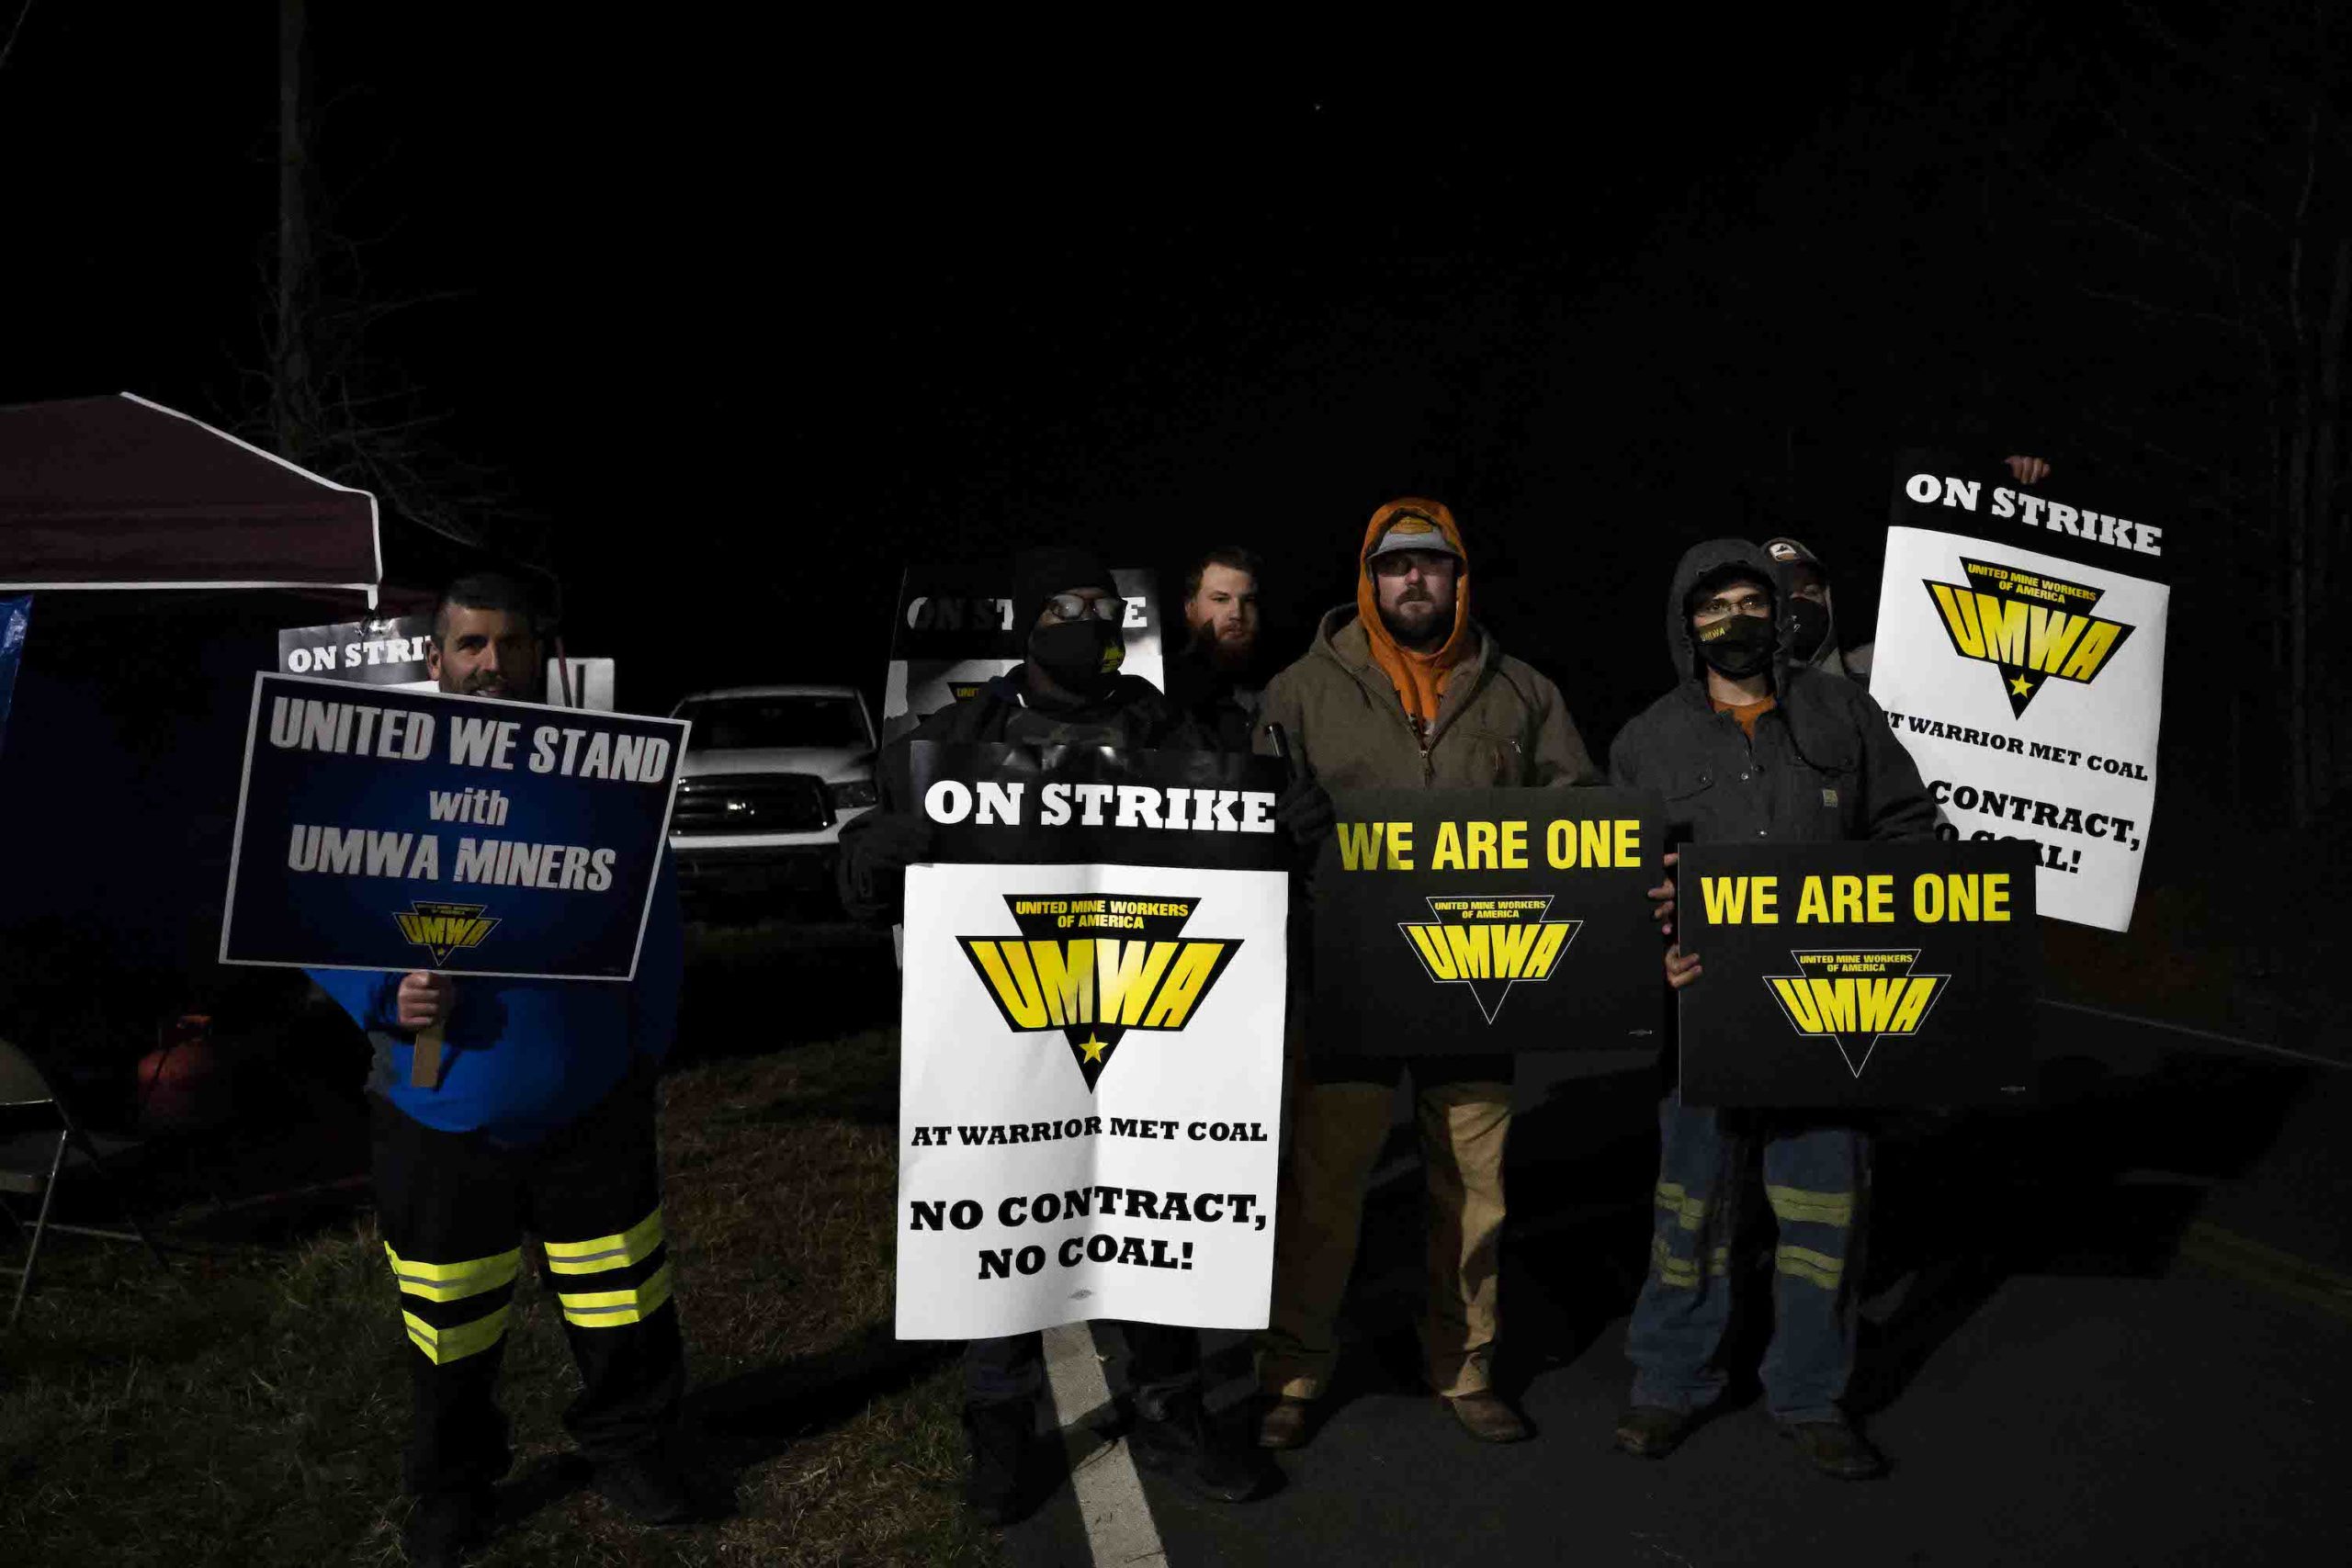 In the dark, striking miners hold up signs saying "No contract, no coal."